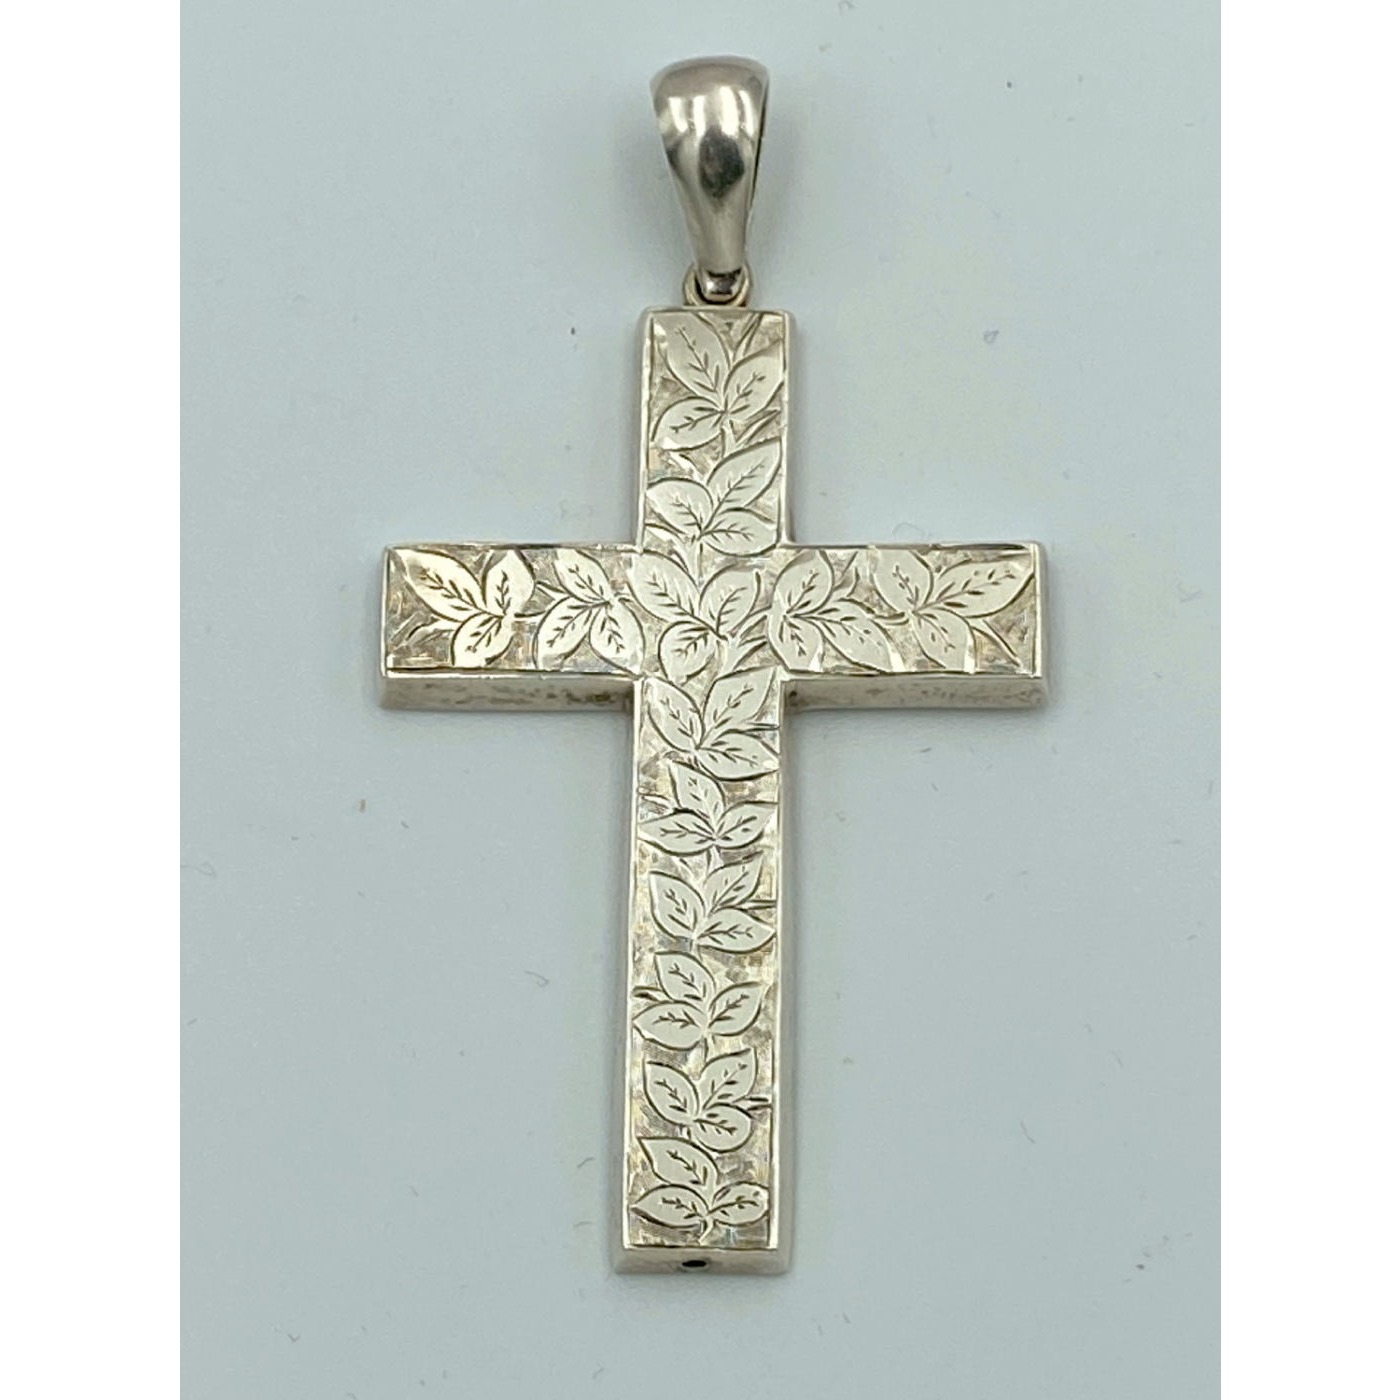 Early Heavily Adorned Ivy Silver Cross Pendant